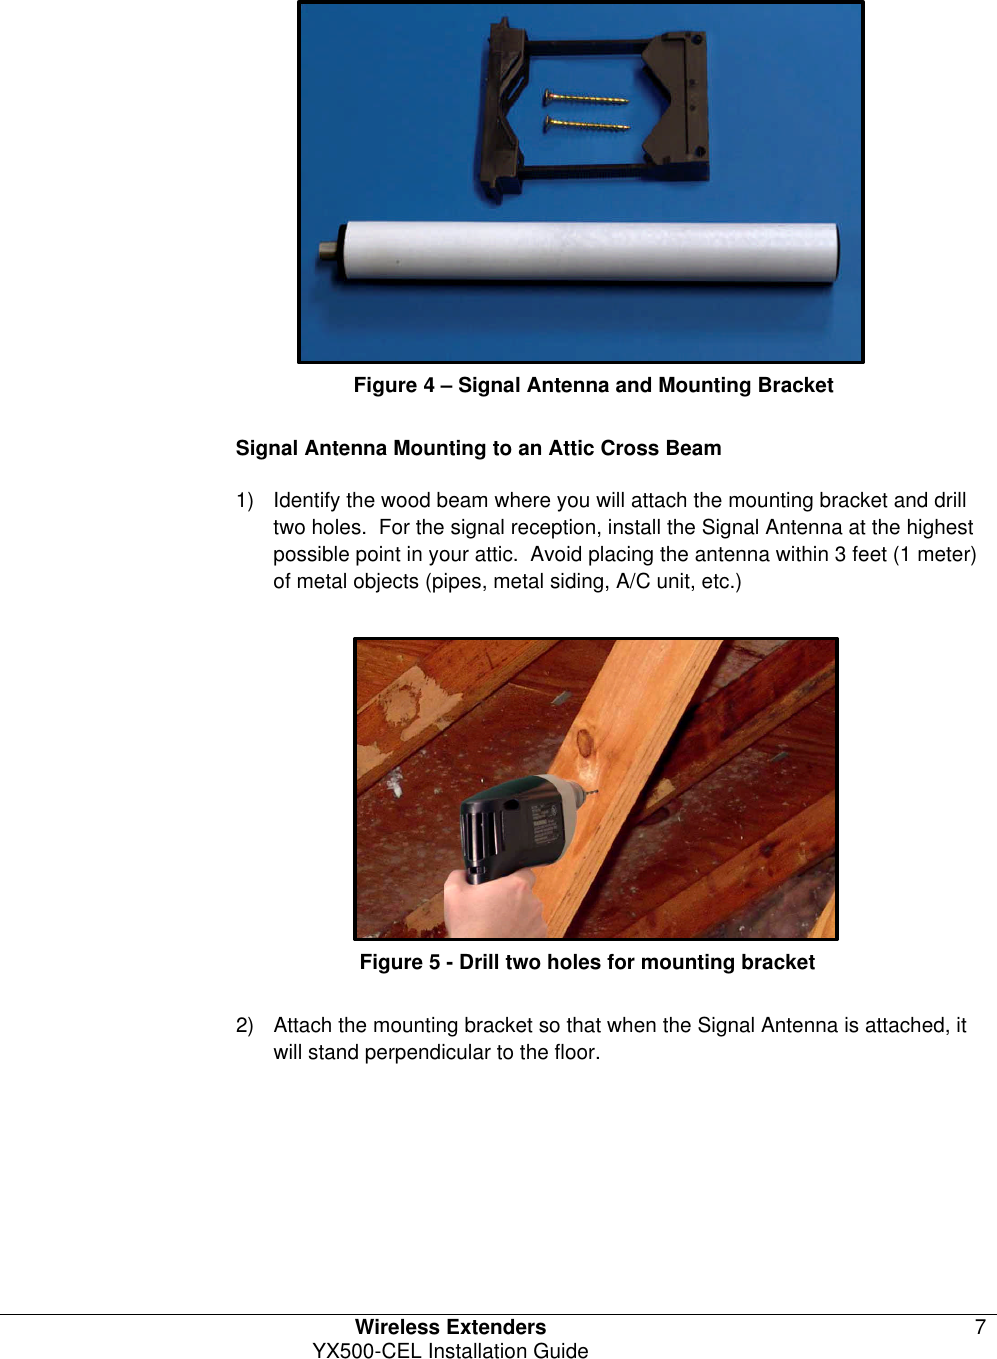   Wireless Extenders 7 YX500-CEL Installation Guide                     Figure 4 – Signal Antenna and Mounting Bracket  Signal Antenna Mounting to an Attic Cross Beam 1) Identify the wood beam where you will attach the mounting bracket and drill two holes.  For the signal reception, install the Signal Antenna at the highest possible point in your attic.  Avoid placing the antenna within 3 feet (1 meter) of metal objects (pipes, metal siding, A/C unit, etc.)                  Figure 5 - Drill two holes for mounting bracket  2) Attach the mounting bracket so that when the Signal Antenna is attached, it will stand perpendicular to the floor. 